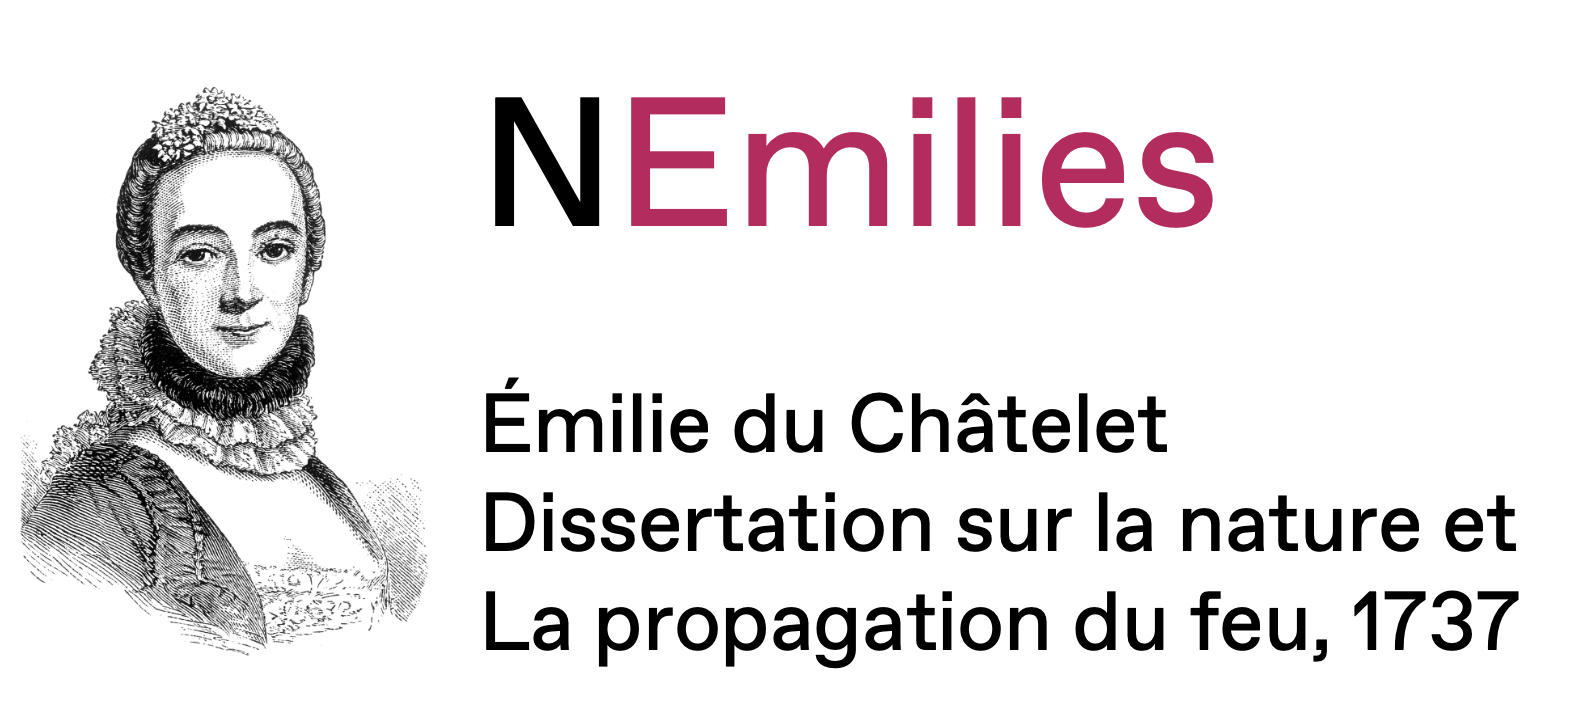 The NEMILIES acronym stands for NanoElectroMechanical Infrared Light for Industrial and Environmental Sensing. The acronym is also a nod to Emilie du Châtelet who proposed the existence of this invisible light that we call Infrared.